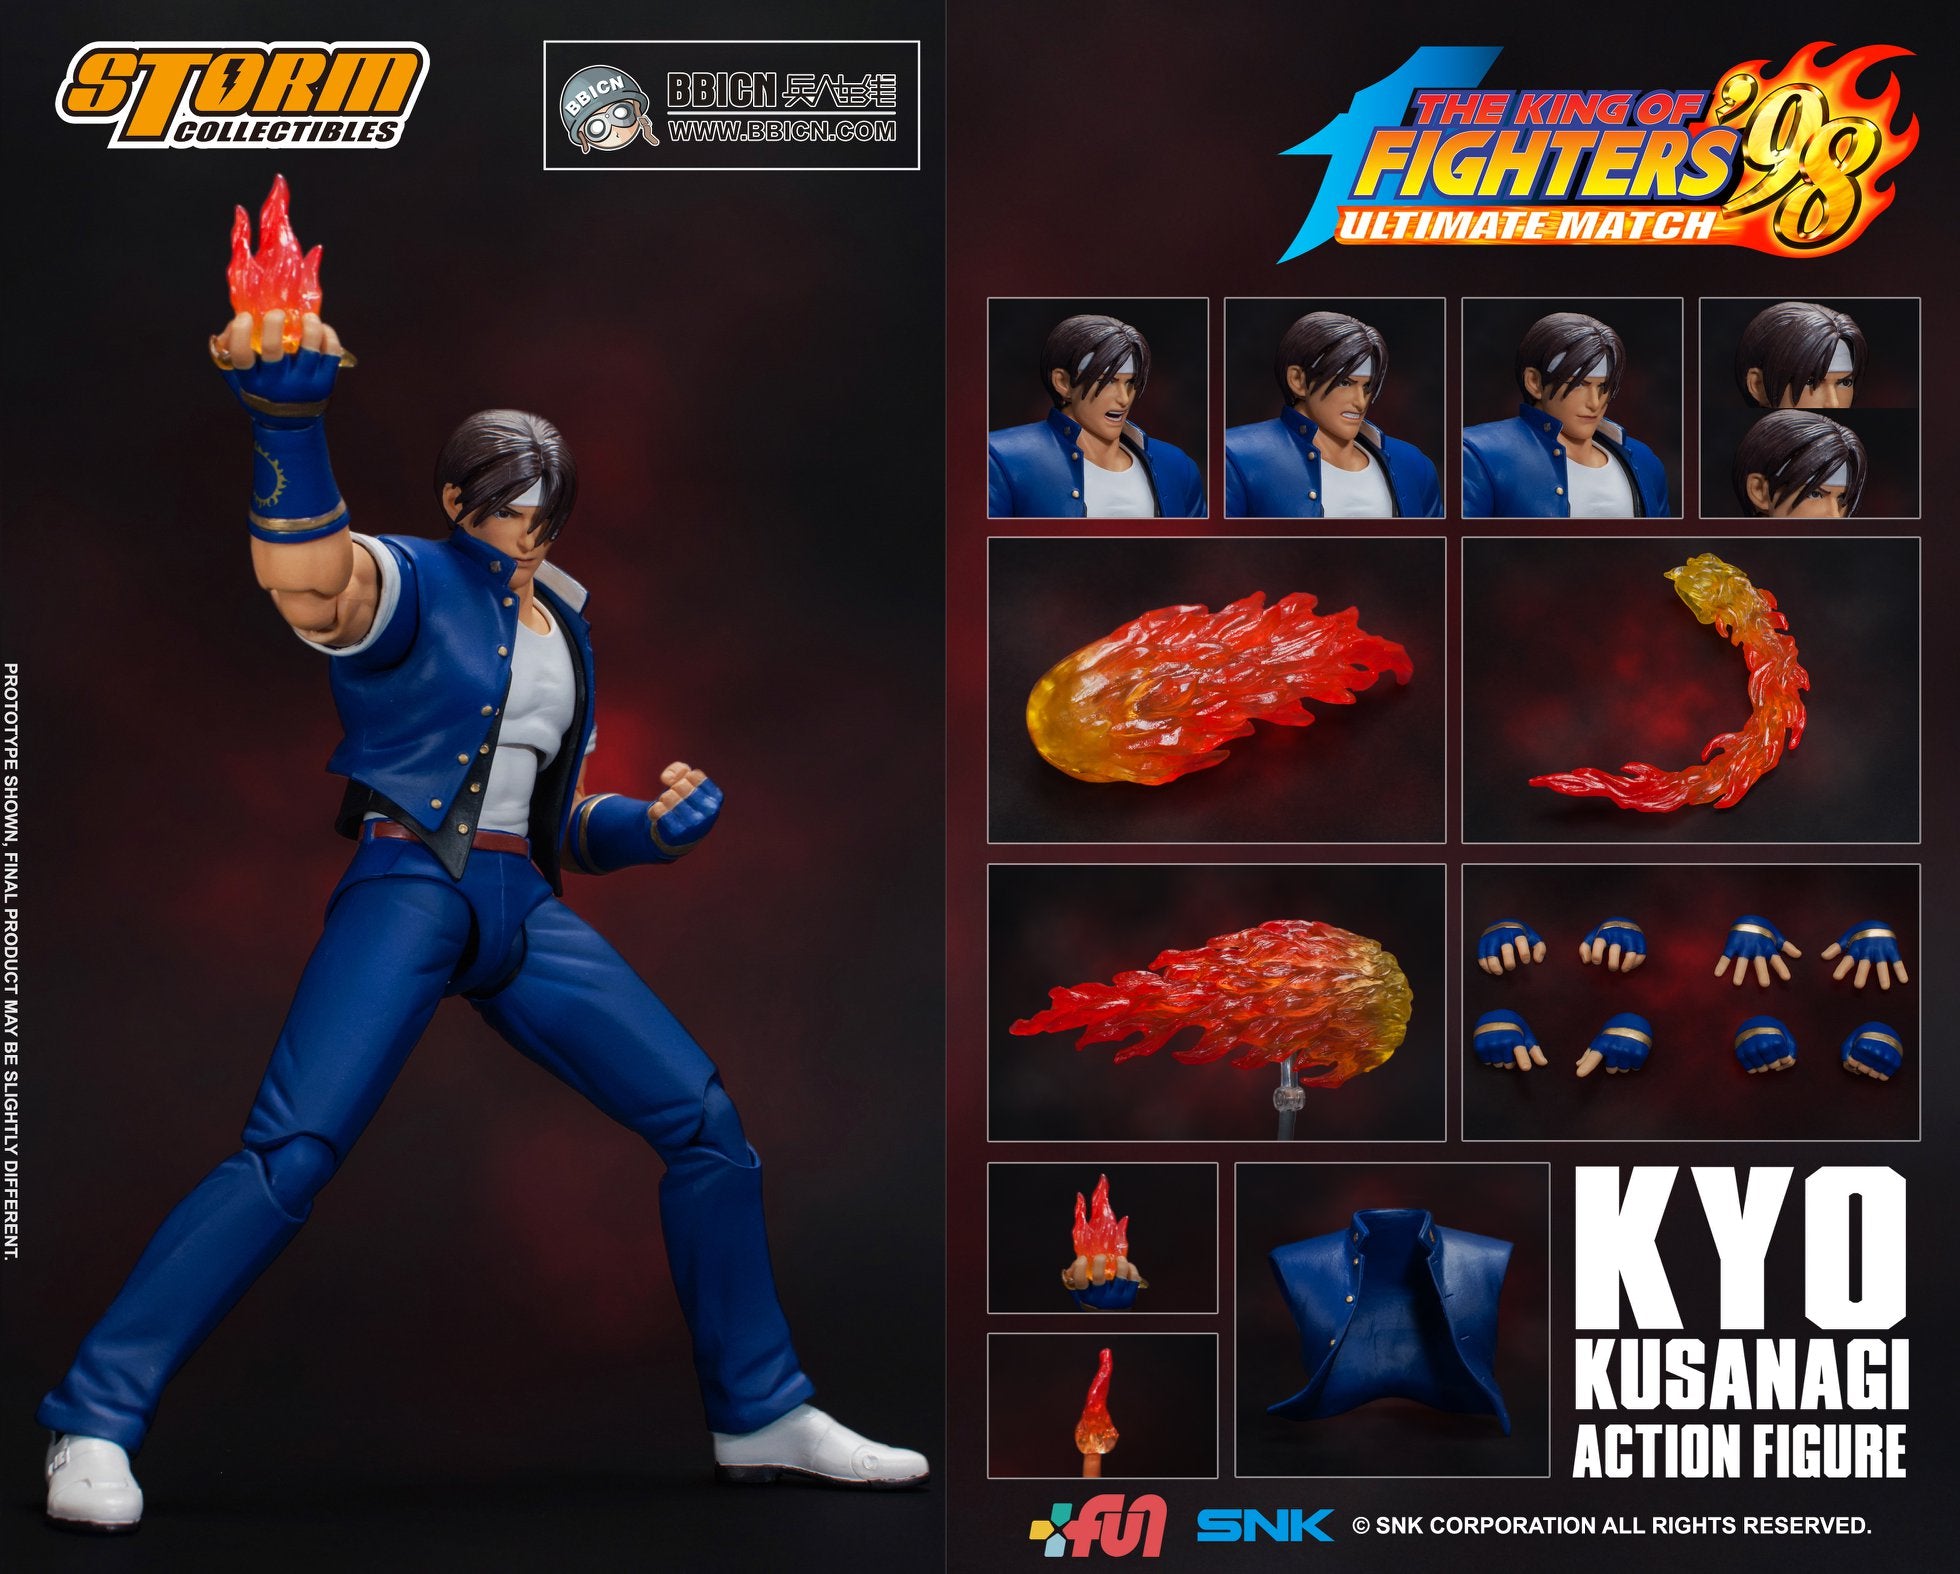 Storm Collectibles - The King of Fighters '98 Ultimate Match - Kyo Kusanagi (Wonder Festival 2019 Exclusive) - Marvelous Toys